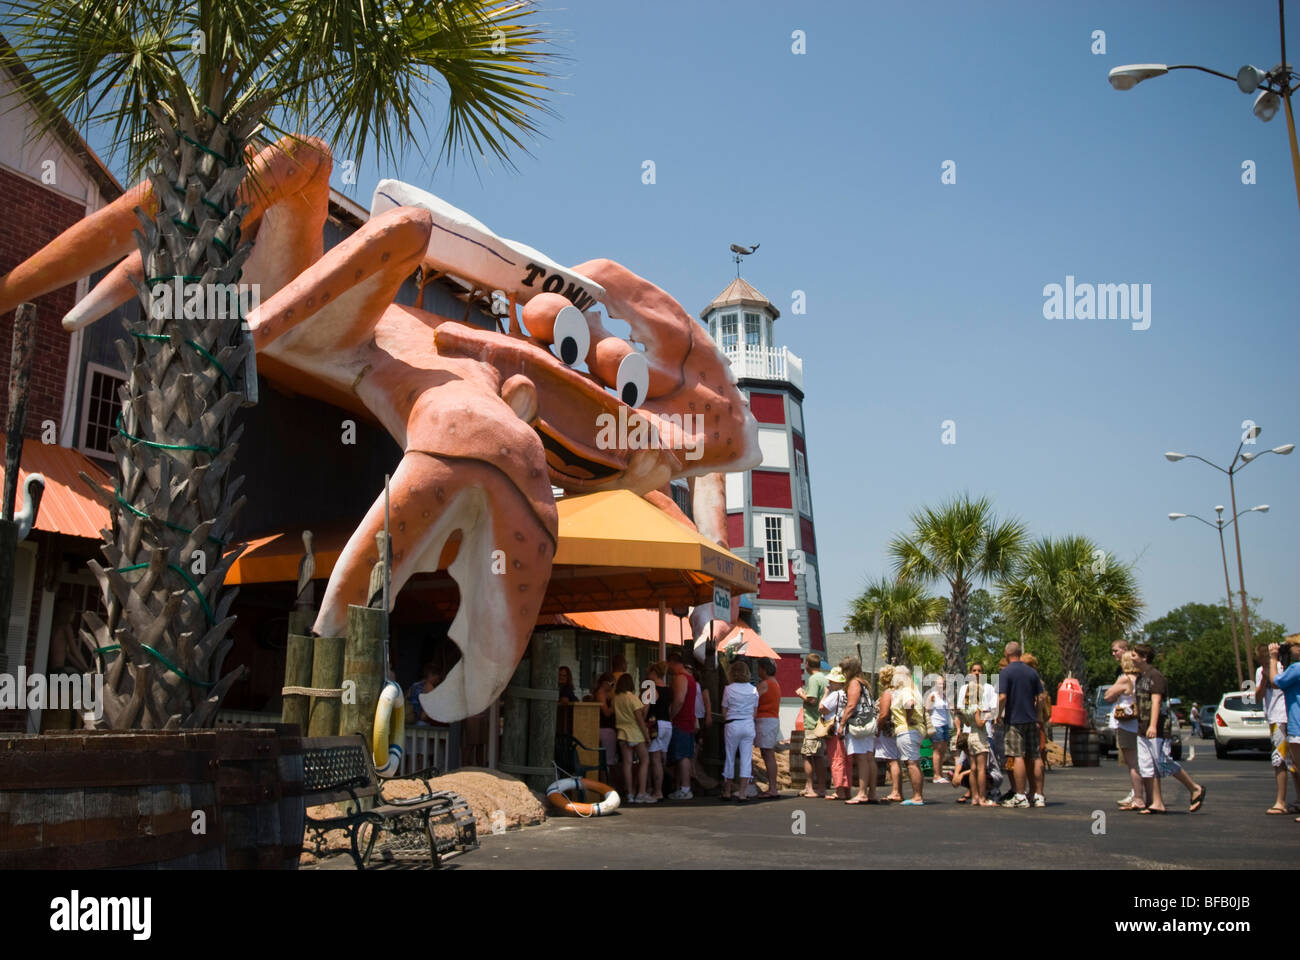 Giant Crab restaurant in Myrtle Beach, South Carolina, United States of